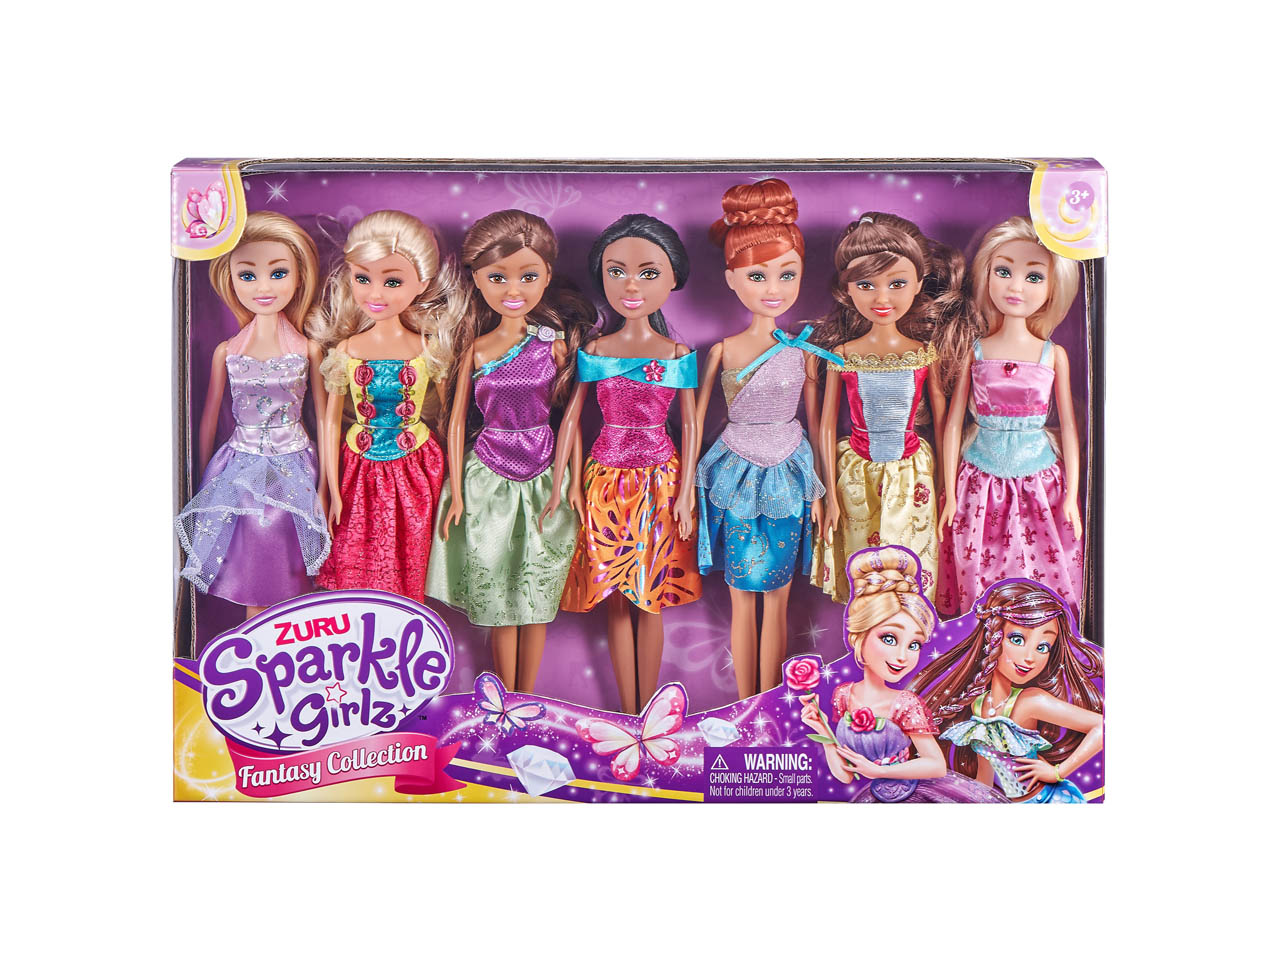 Sparkle Girlz Fantasy Collection - A lot of bang for your buck